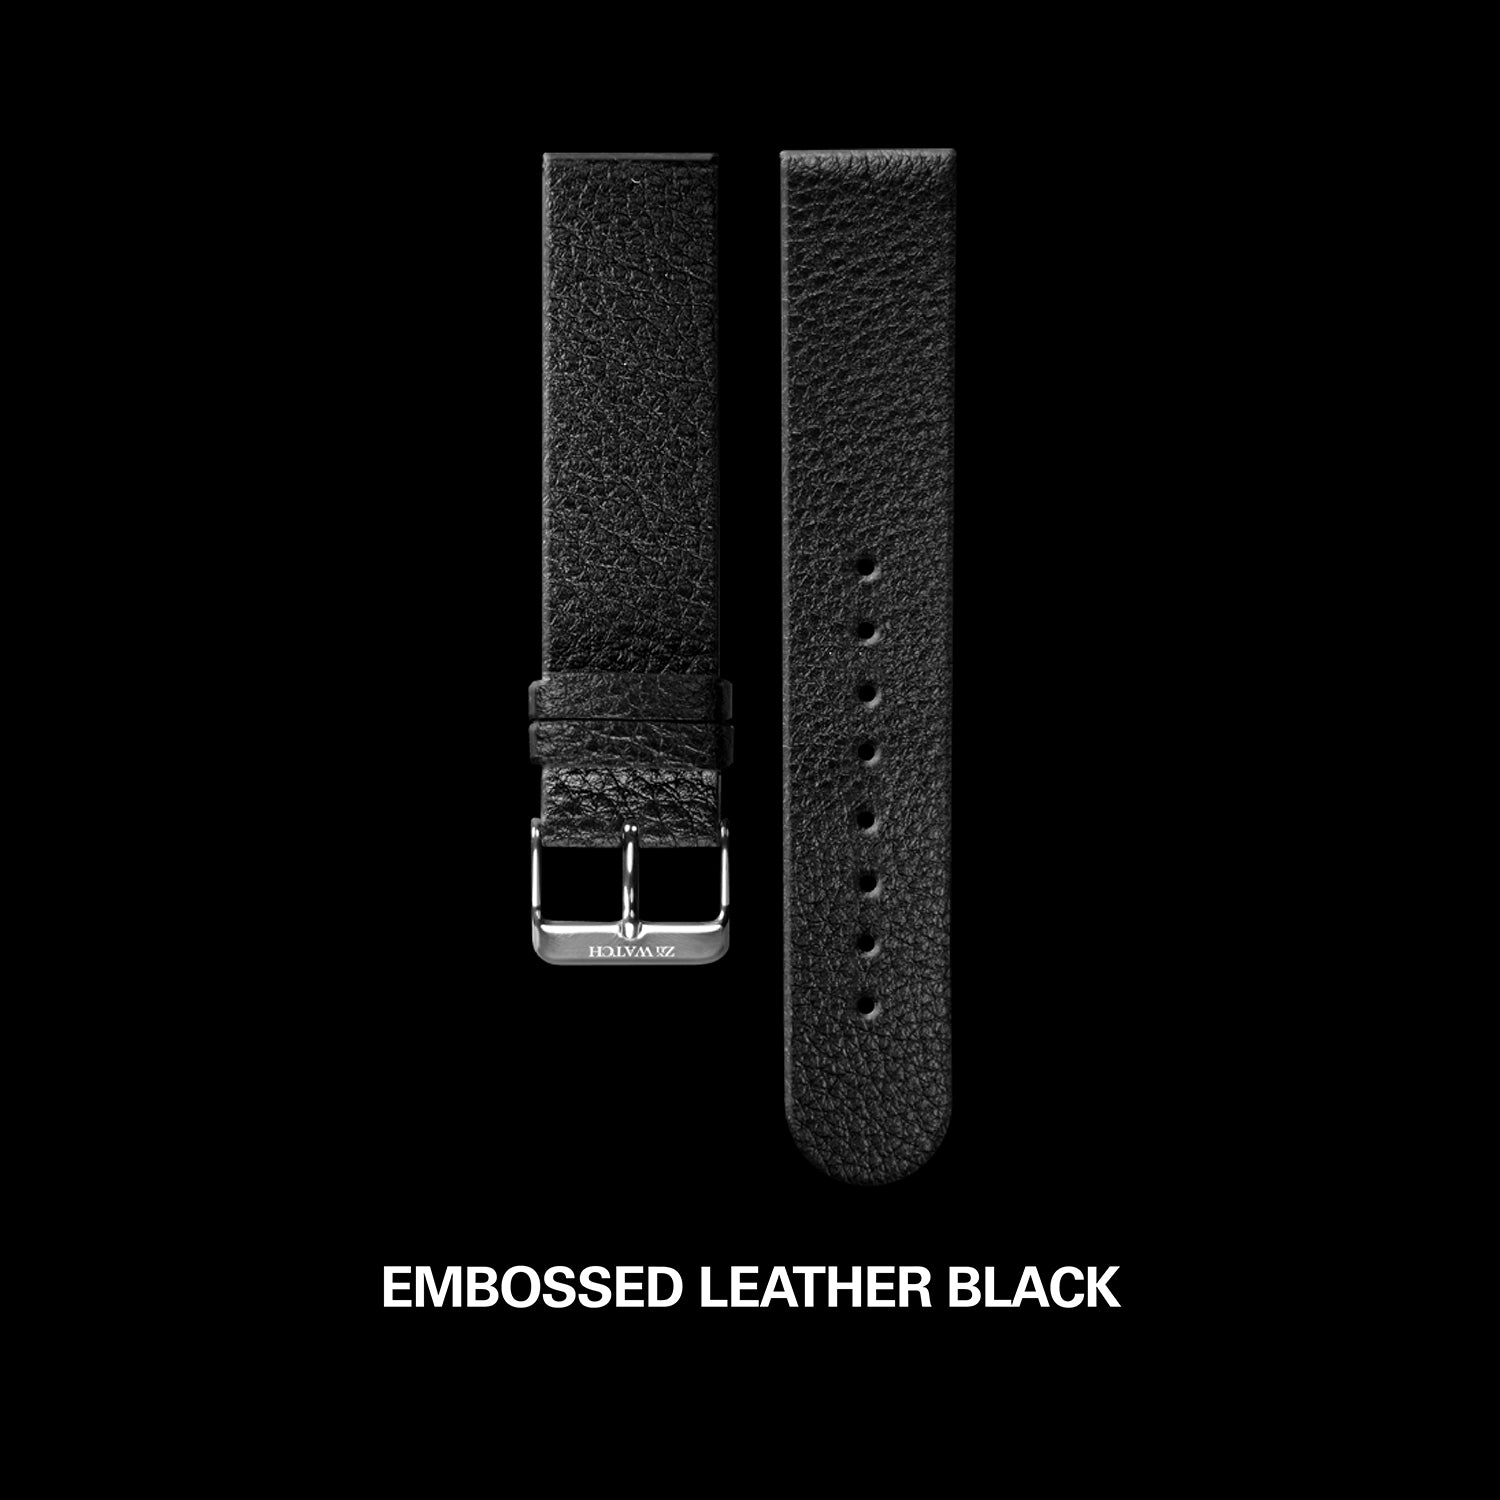 EMBOSSED LEATHER｜BLACK｜STRAP SERIES - yunivers hsieh